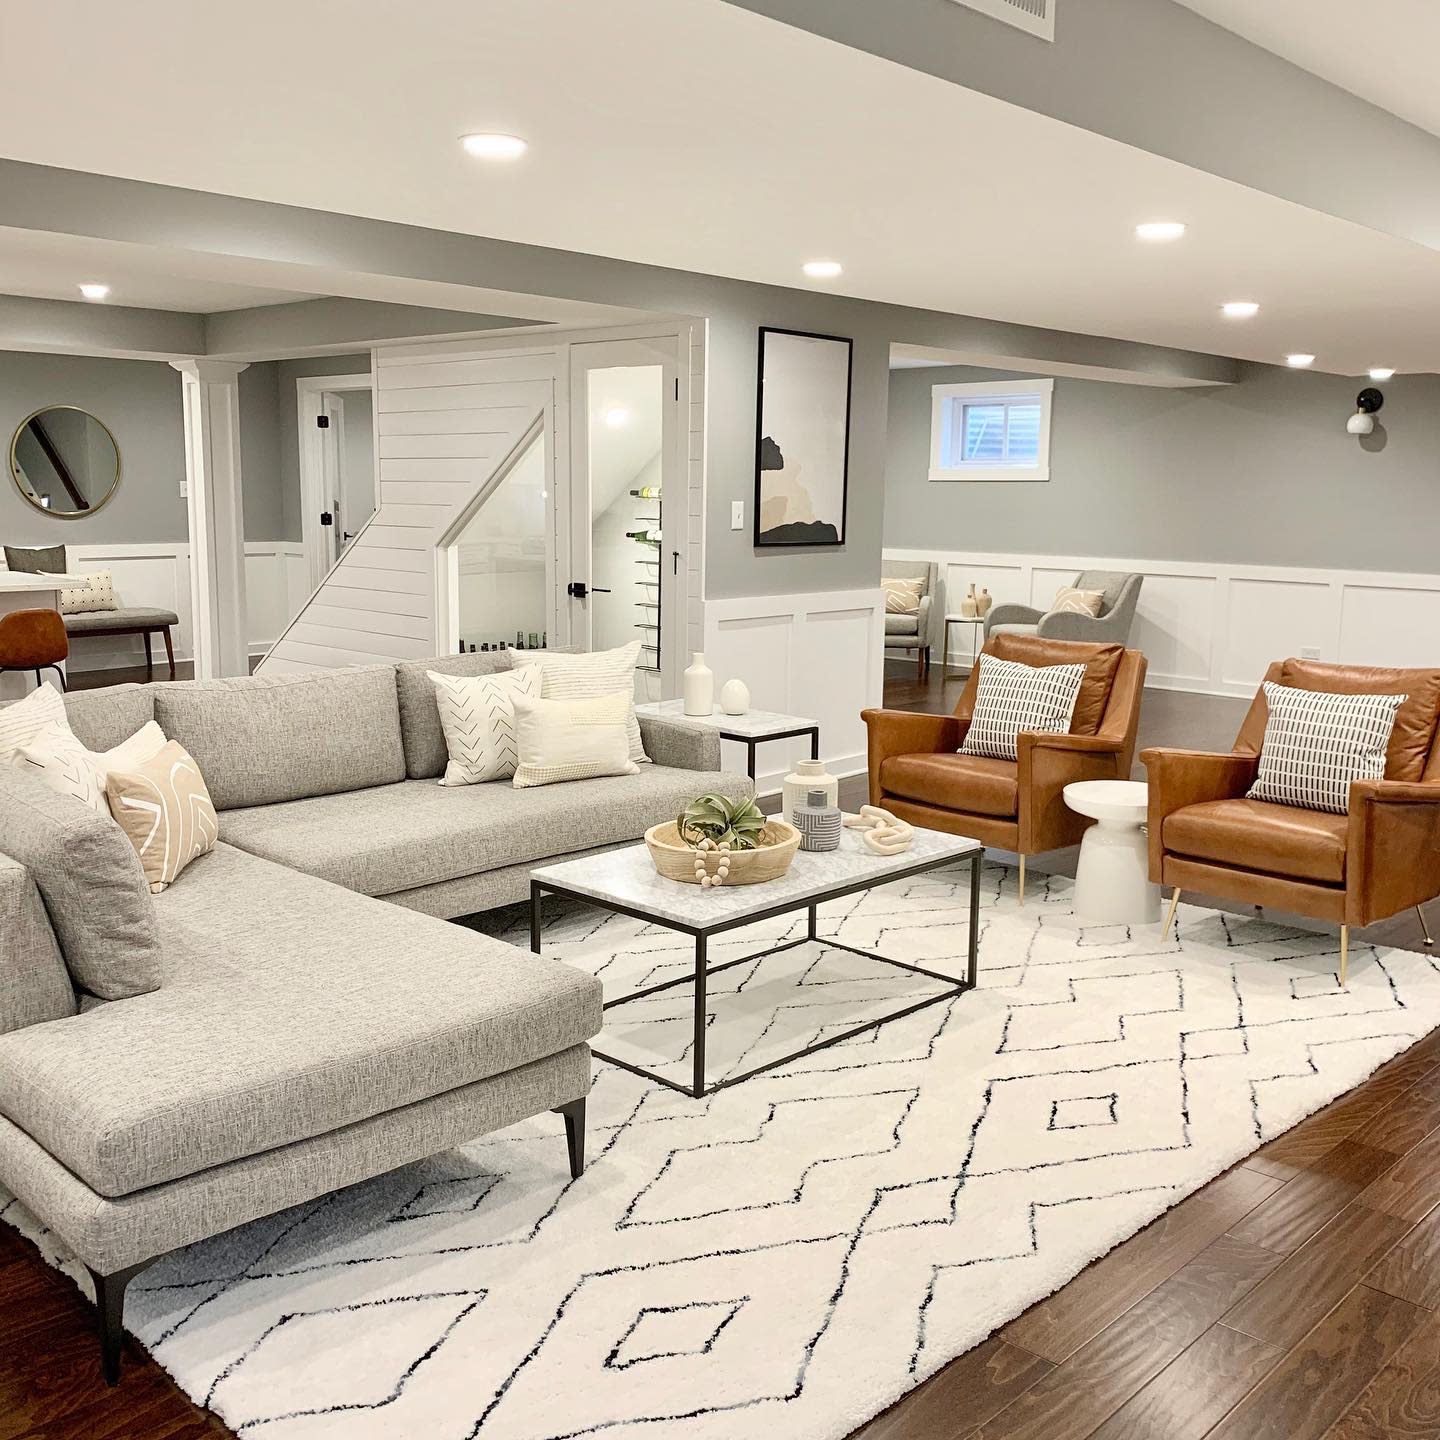 Guest Ready: Designing A Welcoming Basement Suite